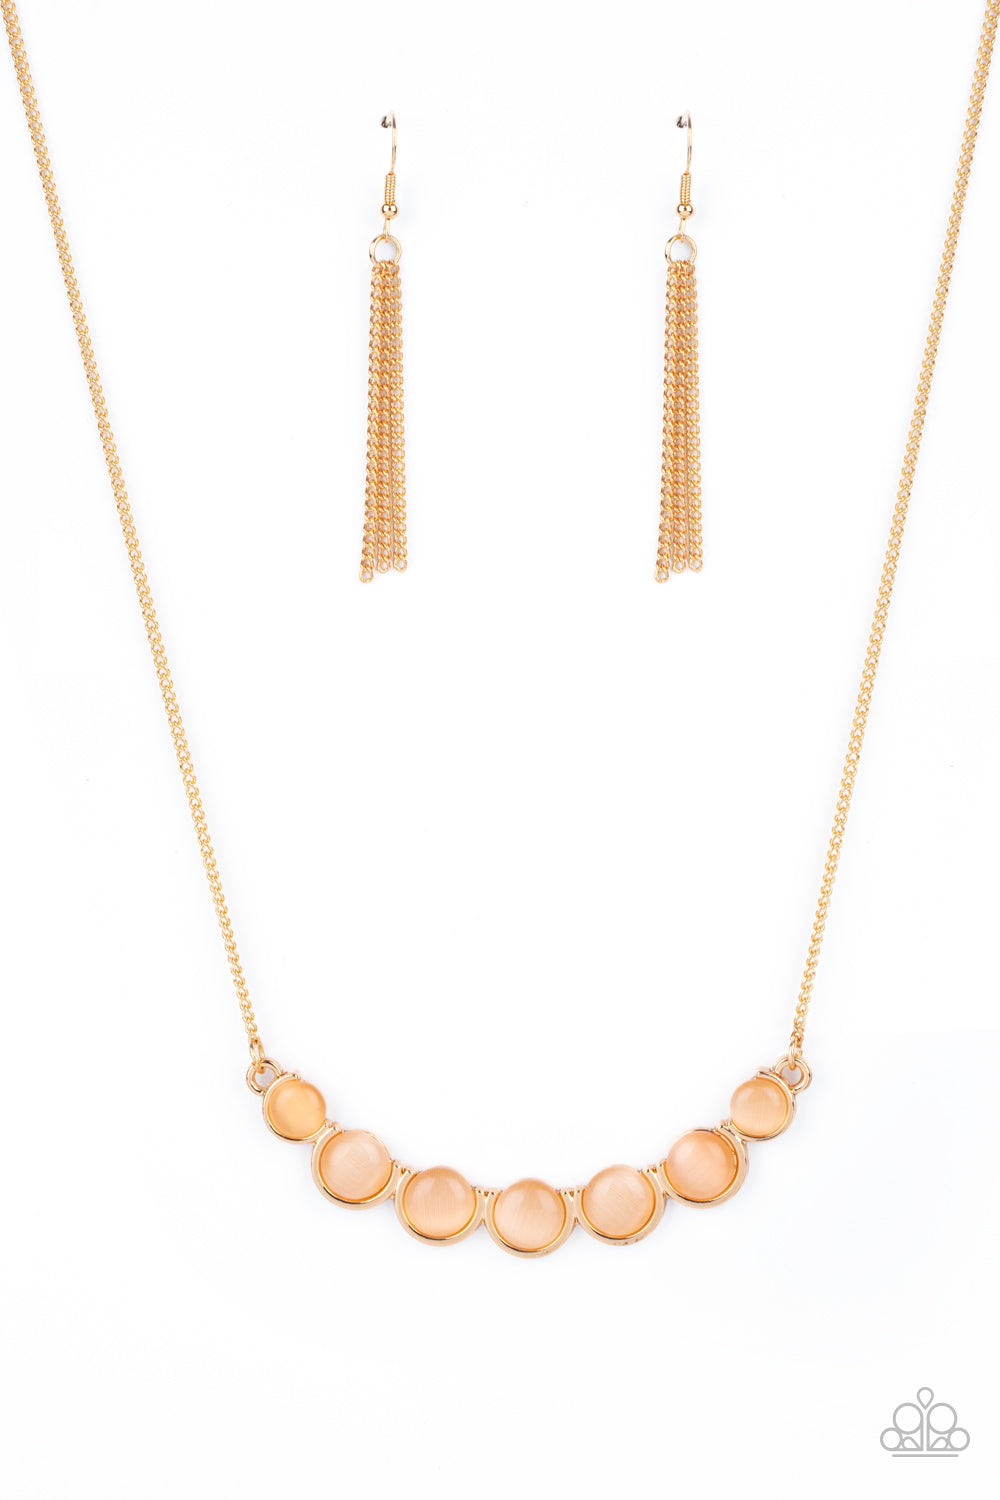 Serenely Scalloped - Gold - Paparazzi Necklace